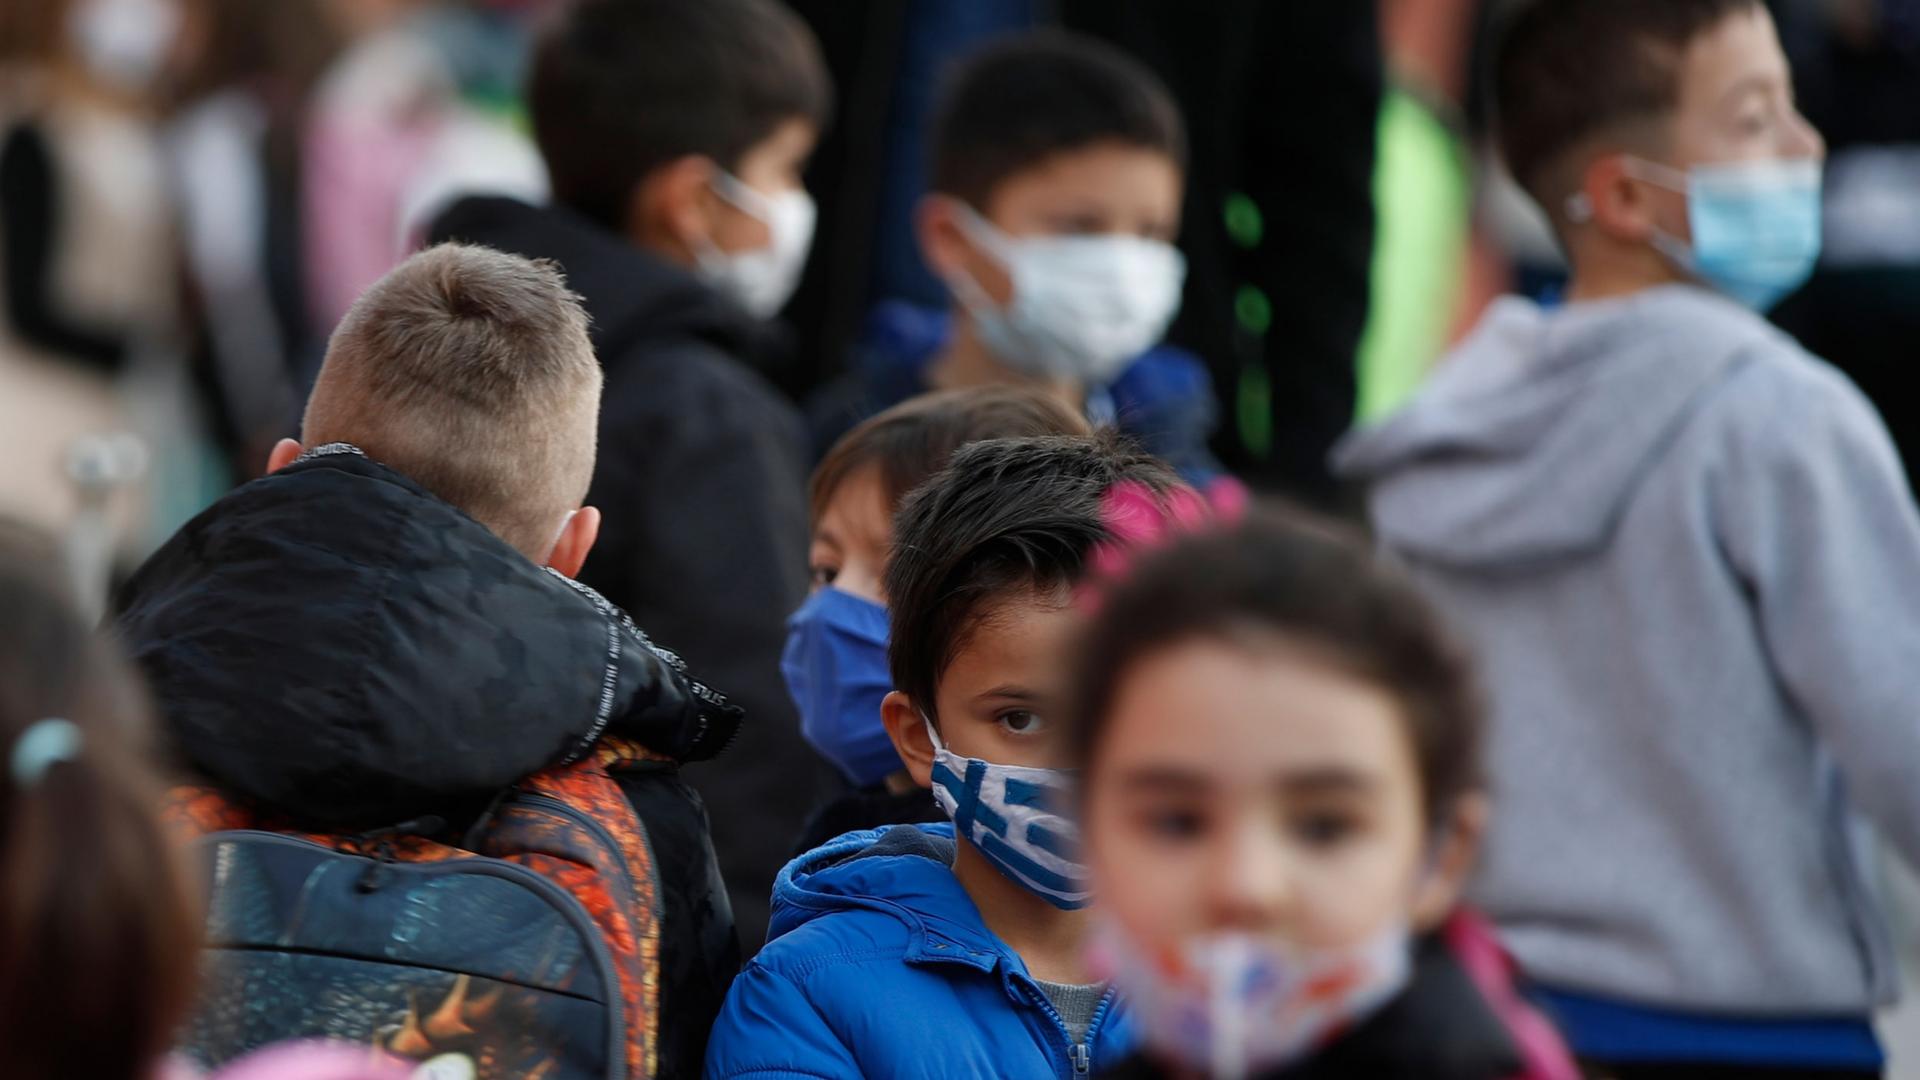 A group of young students are shown wearing face masks and back packs as they wait in liine.